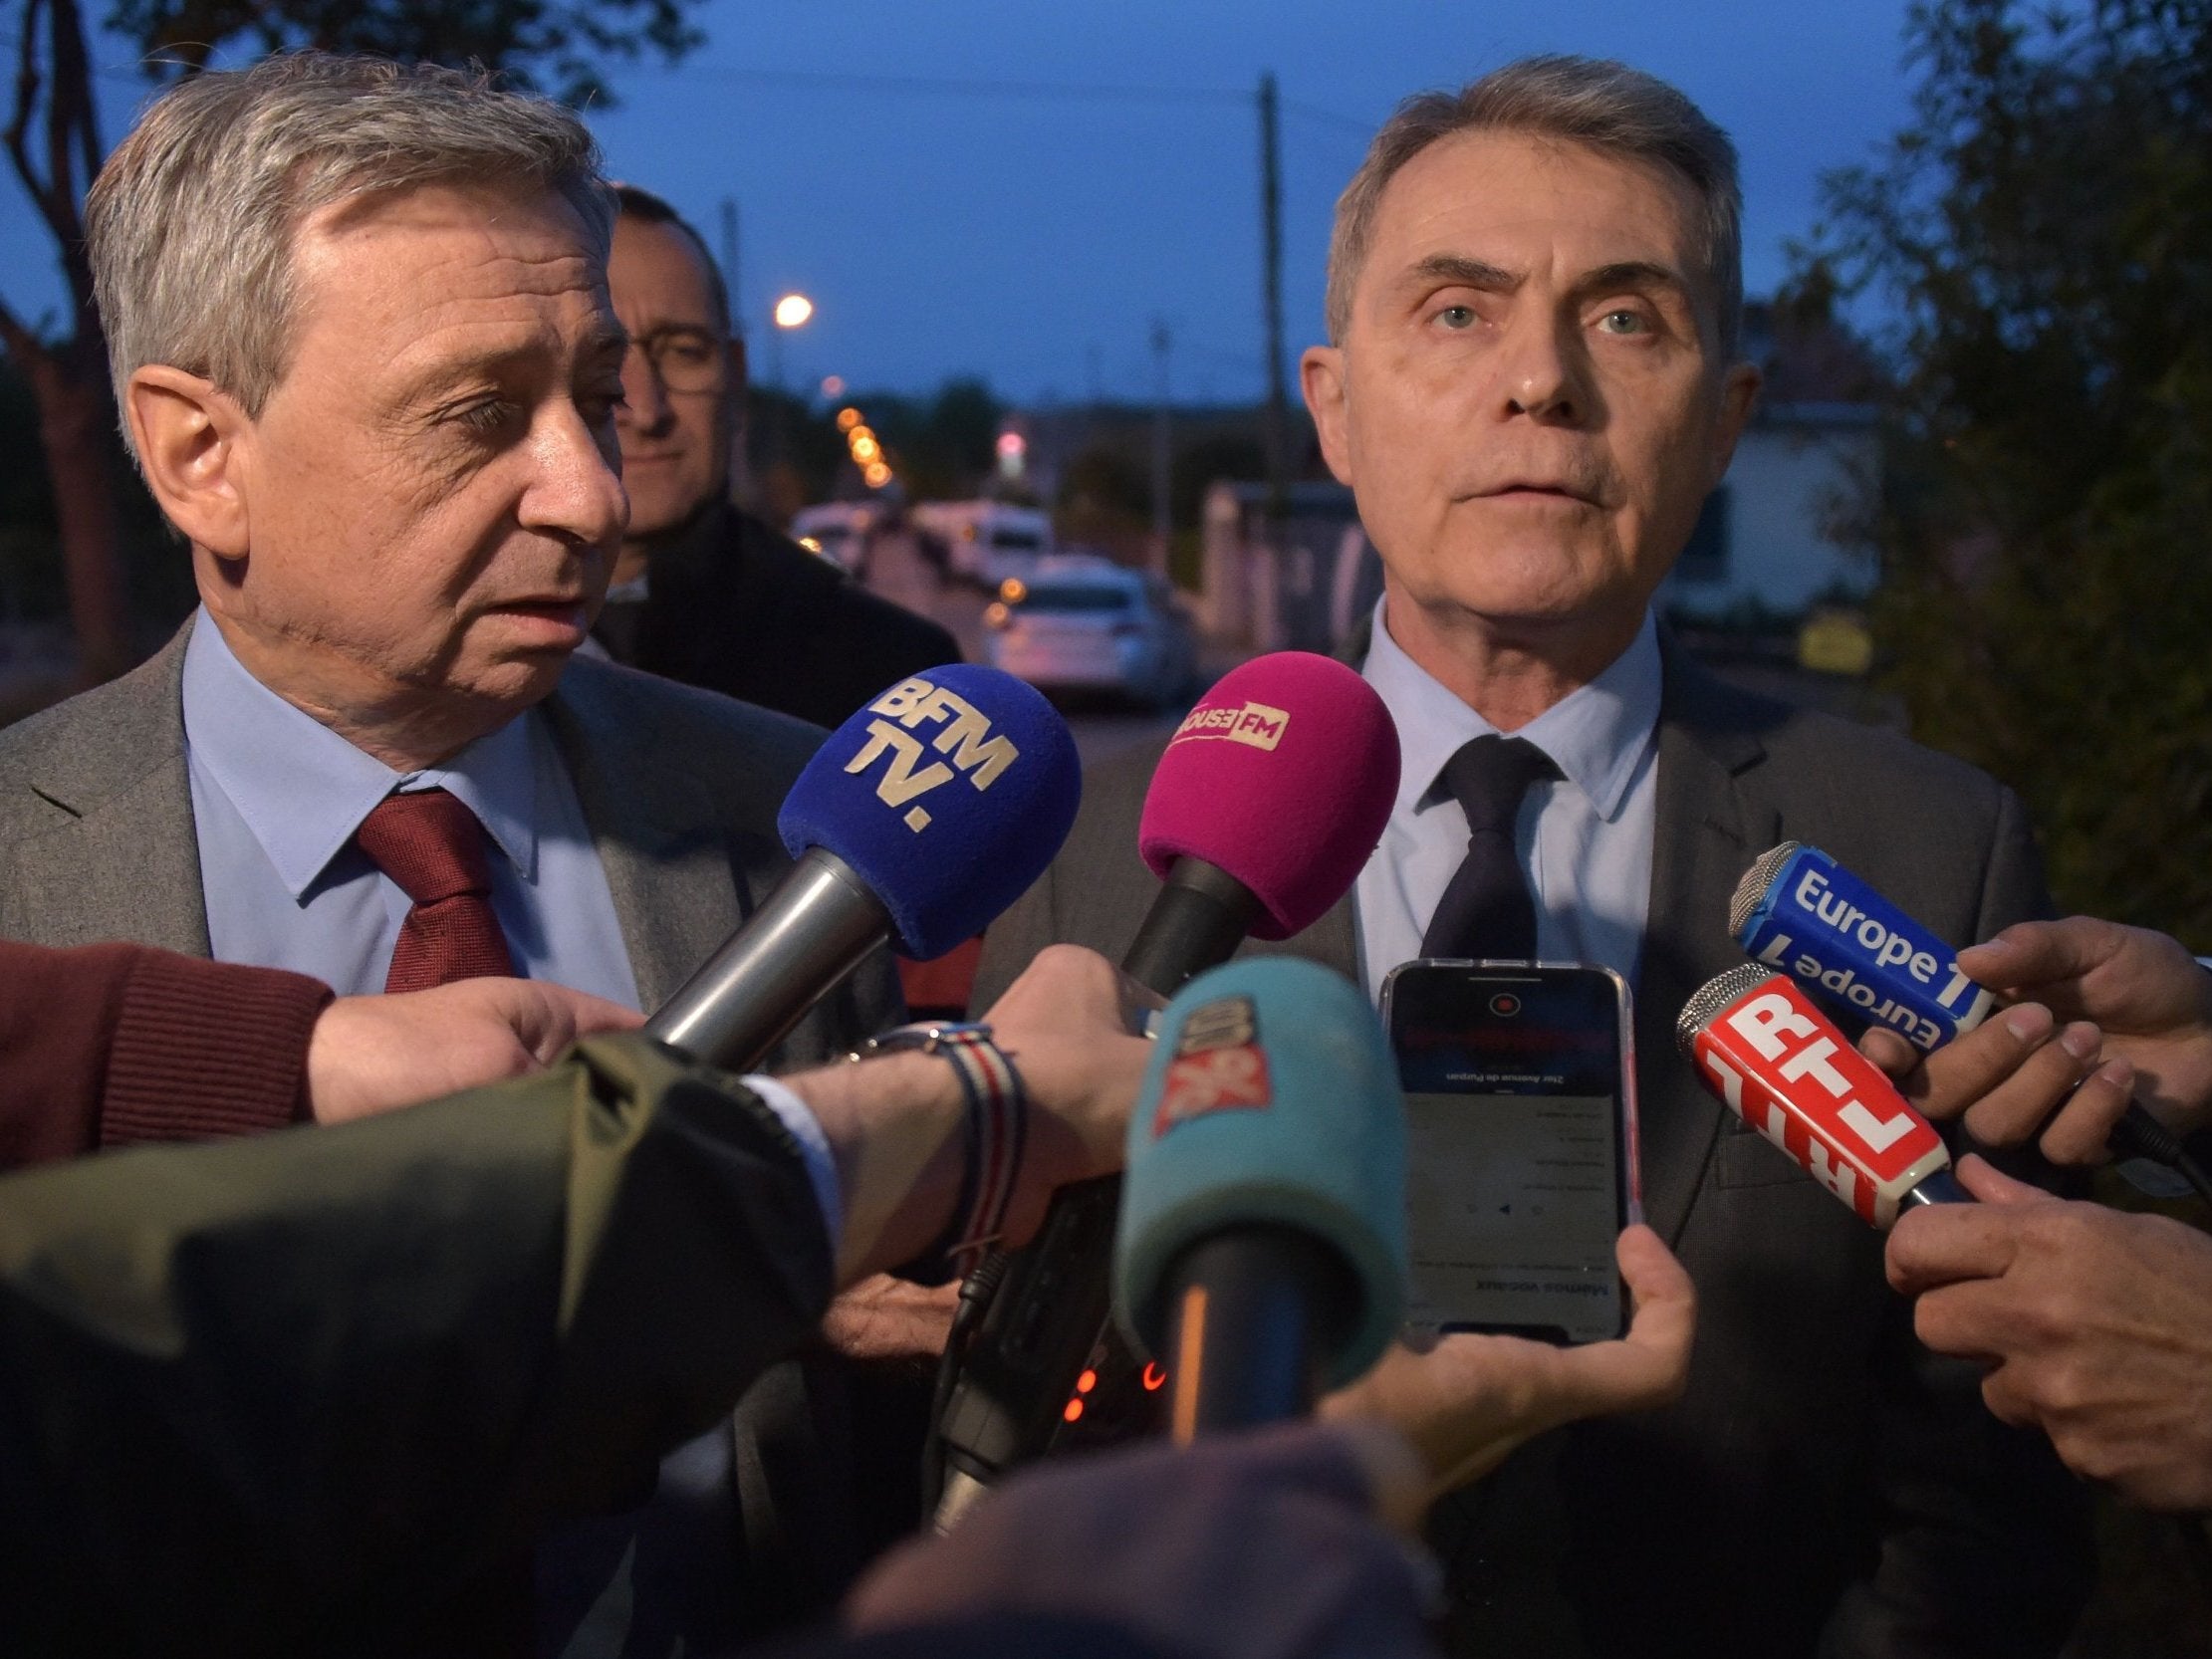 Regional police chief Etienne Guyot (l), and Toulouse's public prosecutor Dominique Alzeari talk to the press in Blagnac during standoff